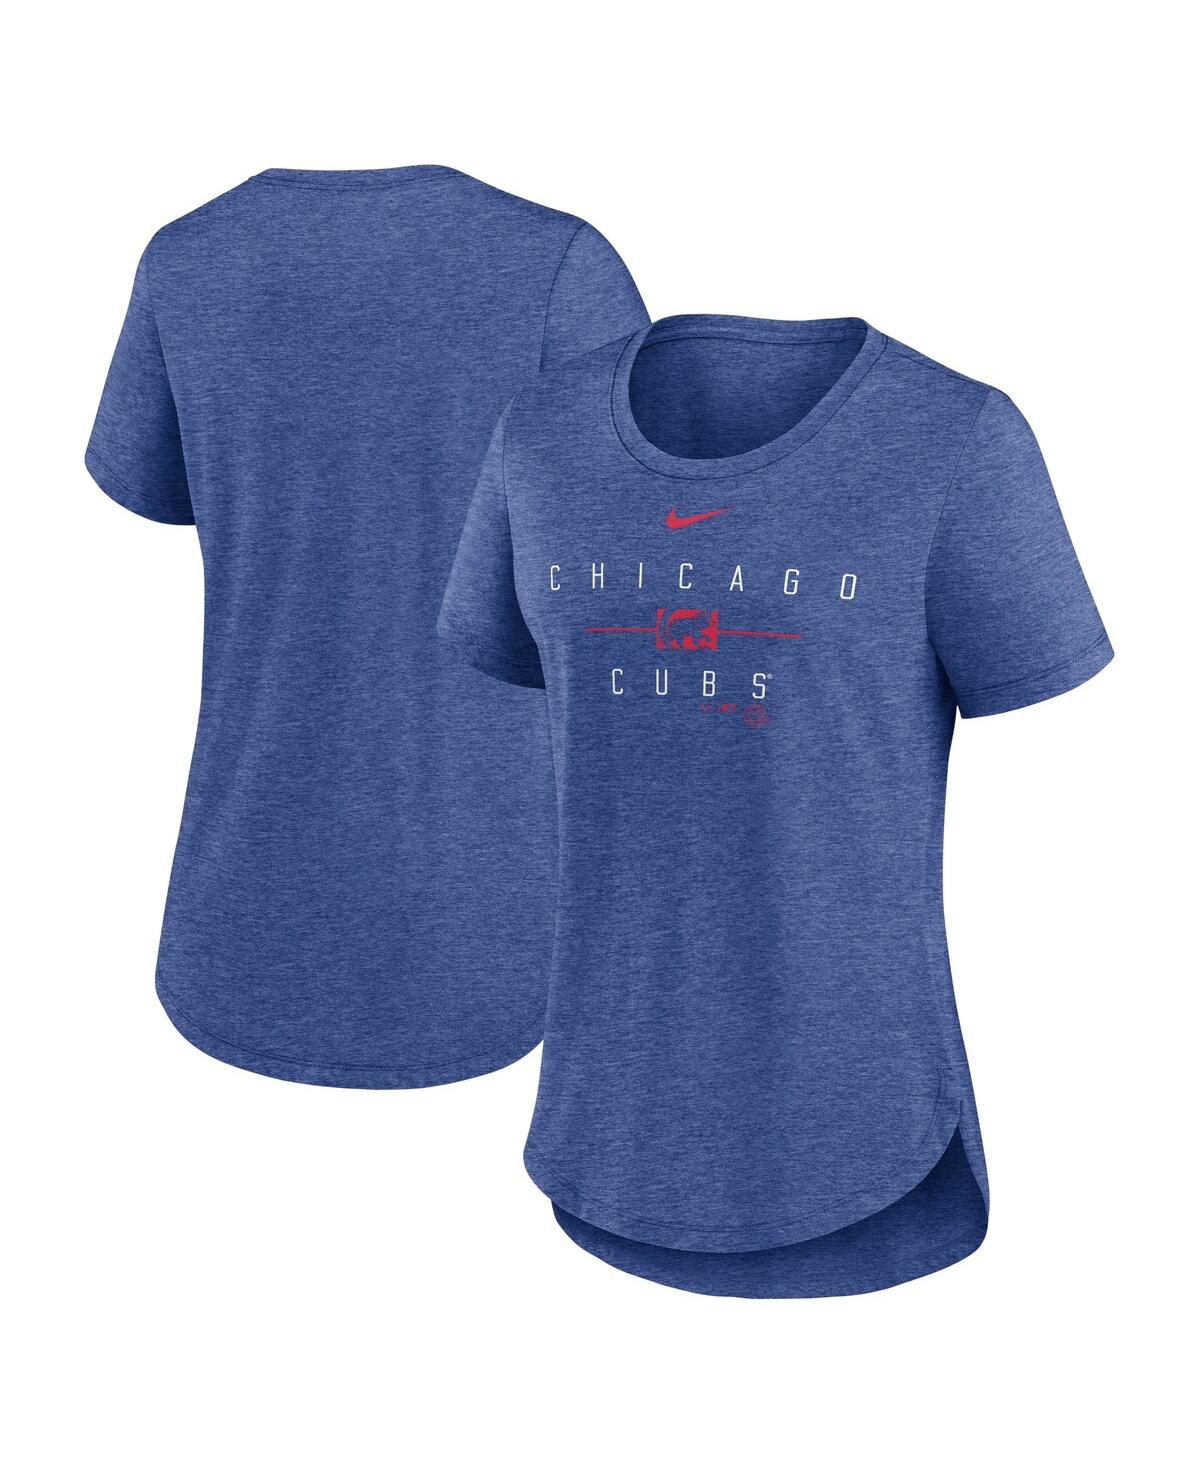 Women's Nike Heather Royal Chicago Cubs Knockout Team Stack Tri-Blend T-shirt - Heather Royal